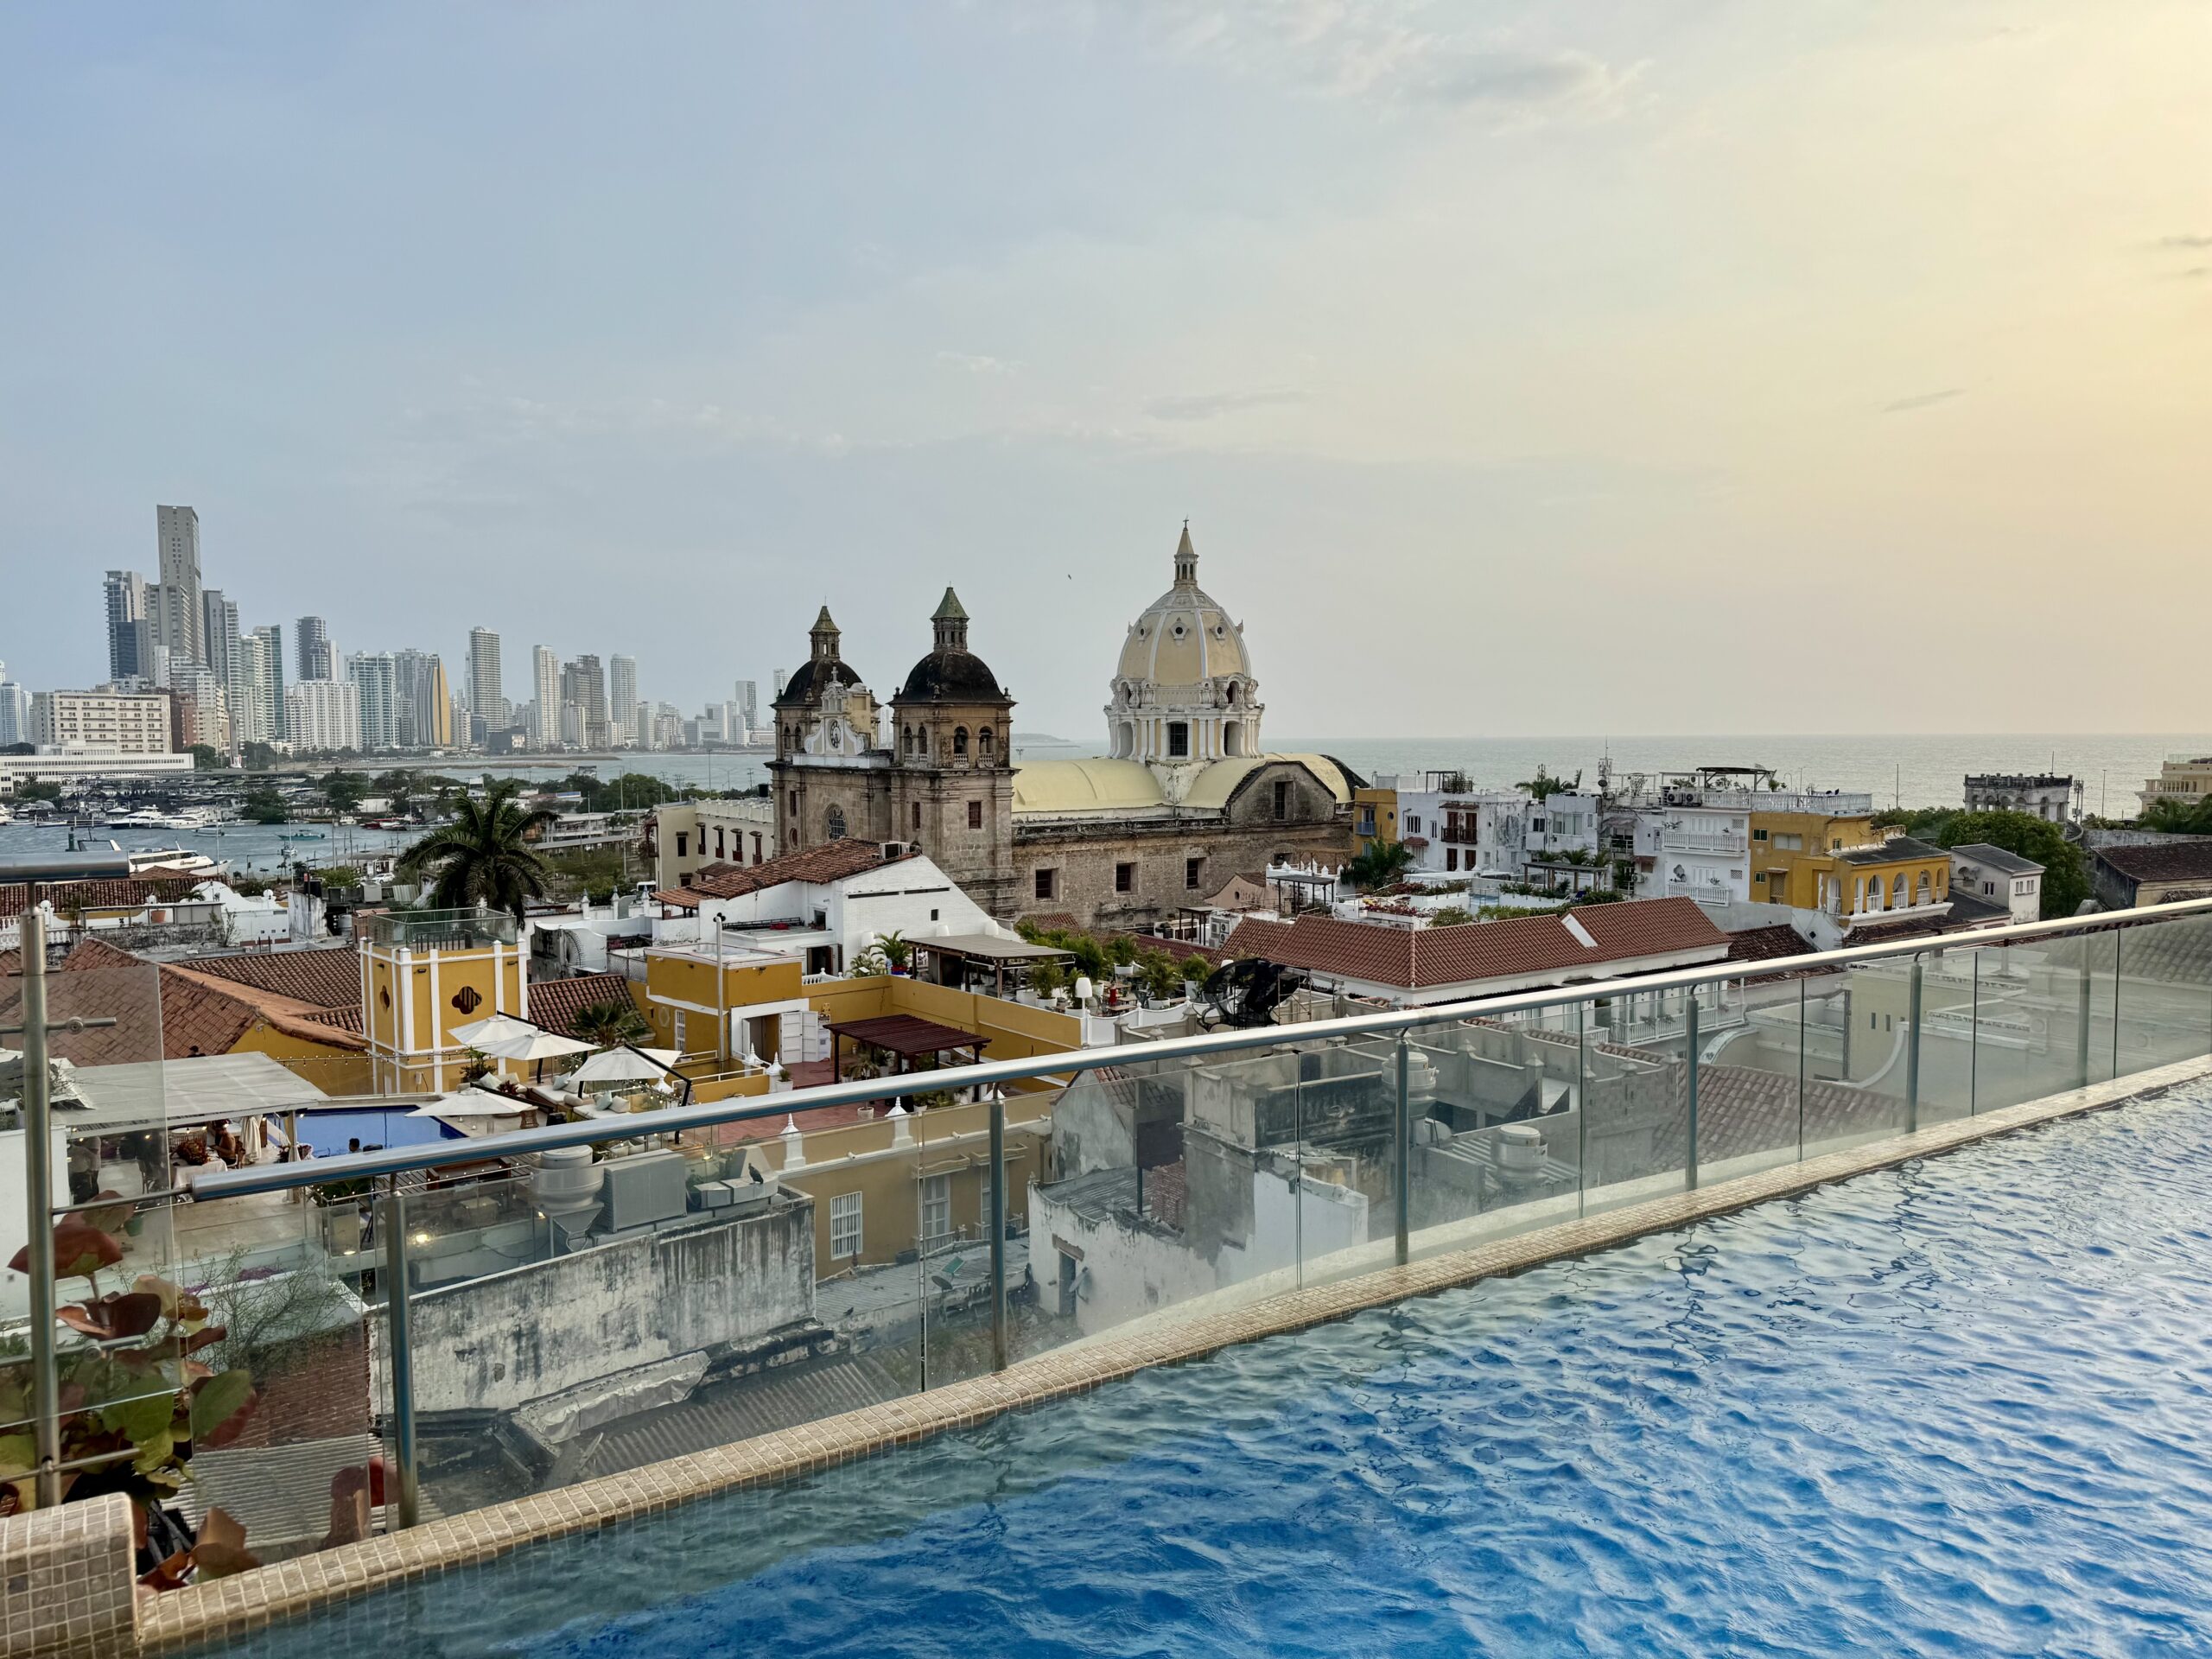 A rooftop restaurant and a pool at Movich Hotel, Cartagena